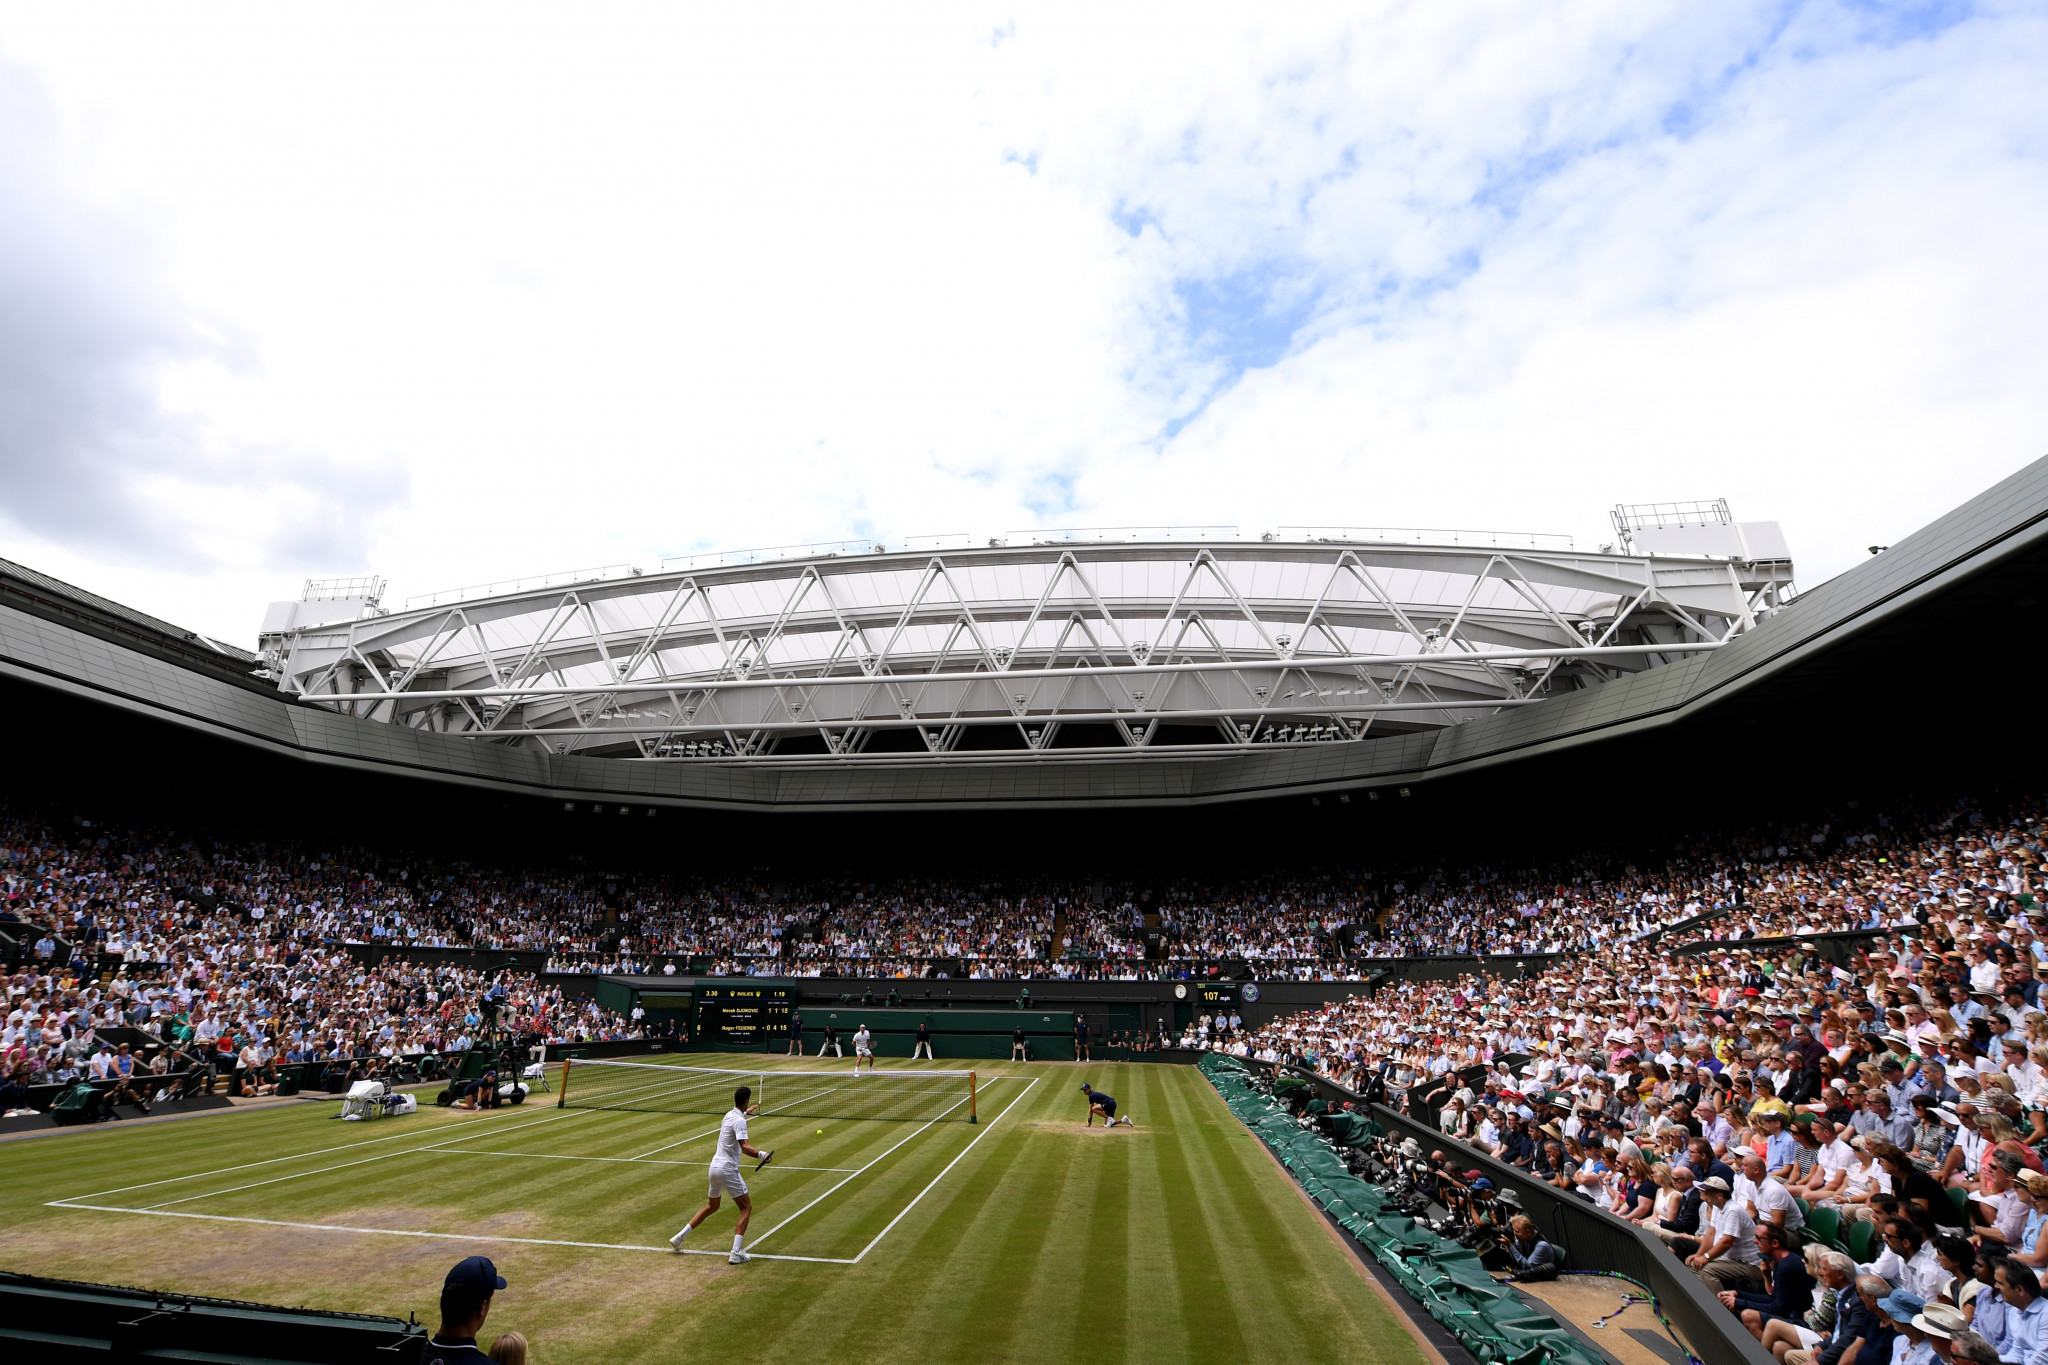 Preparations for Wimbledon are continuing despite the coronavirus crisis ©Getty Images